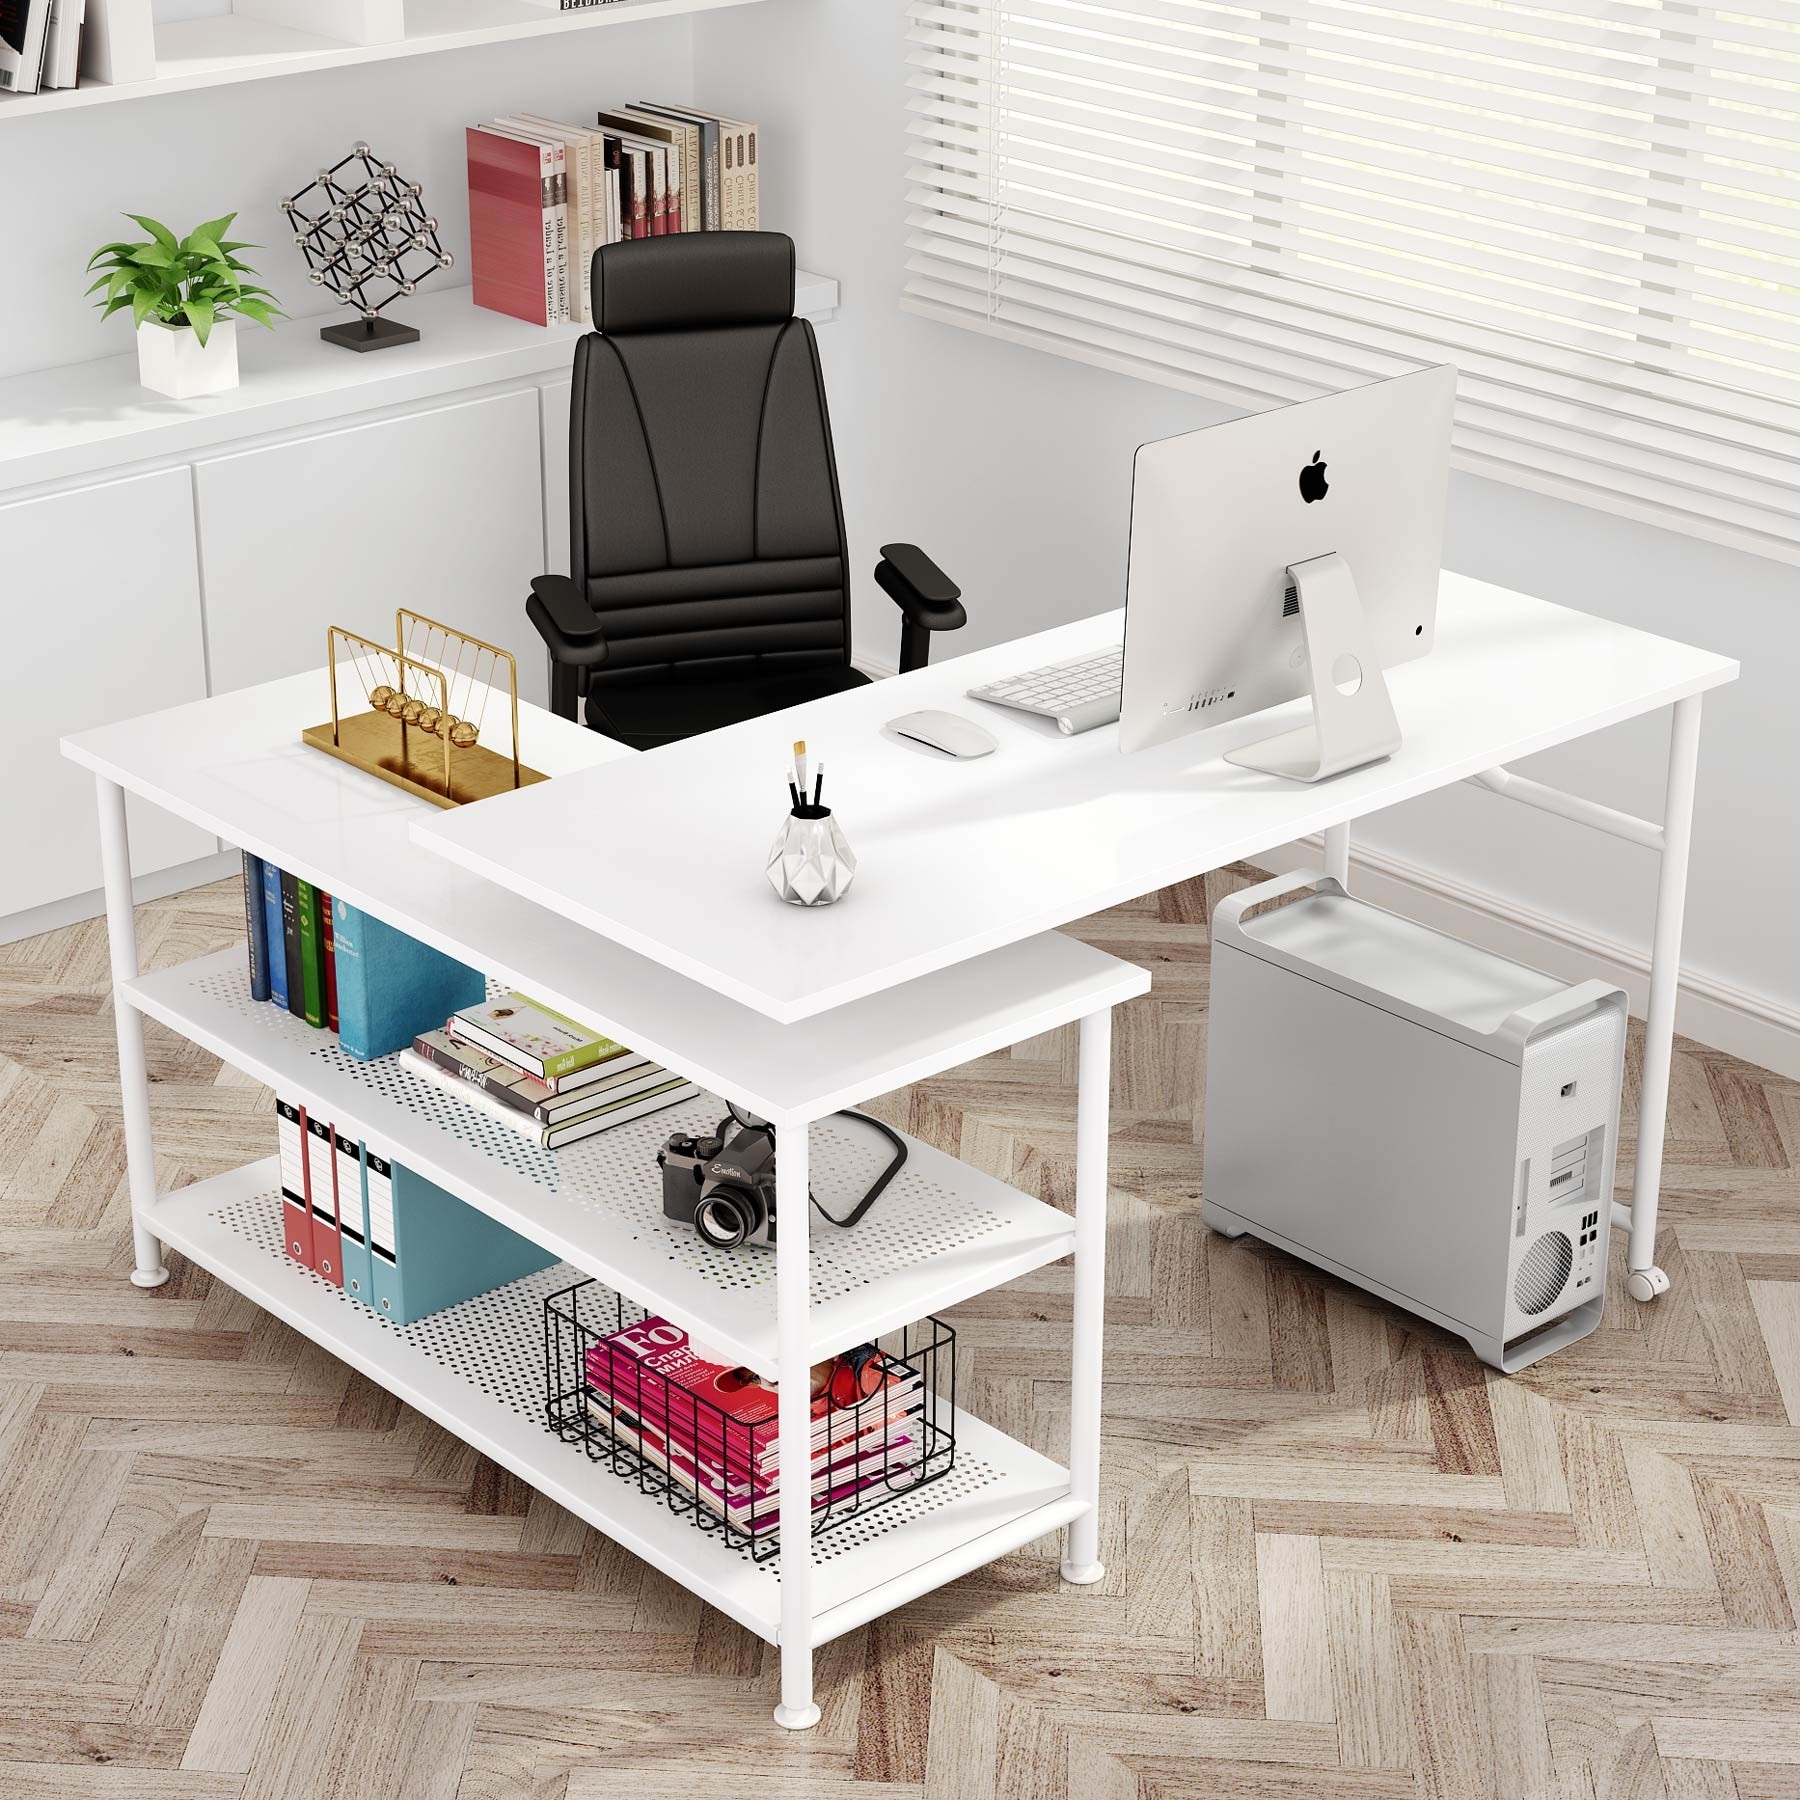 https://ak1.ostkcdn.com/images/products/is/images/direct/6e9f3b9d6c1786733477709938f73badba11763c/L-Shaped-Computer-Desk-with-Shelves-360-deg-Rotating-Desk-Study-Writing-Table.jpg